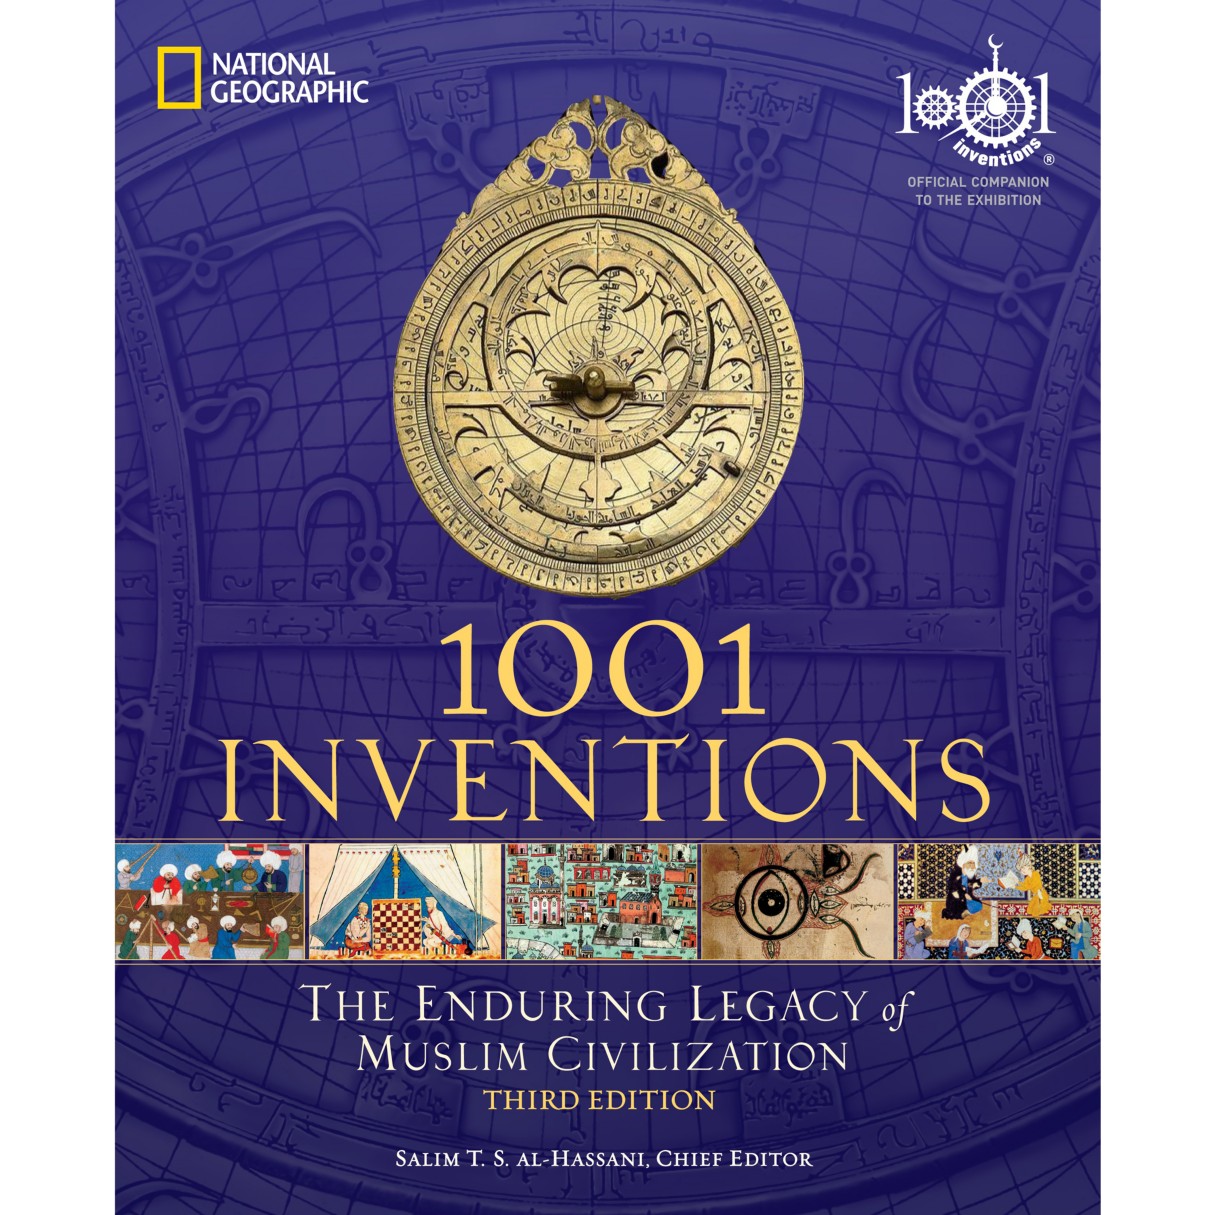 1001 Inventions: The Enduring Legacy of Muslim Civilization Book – National Geographic